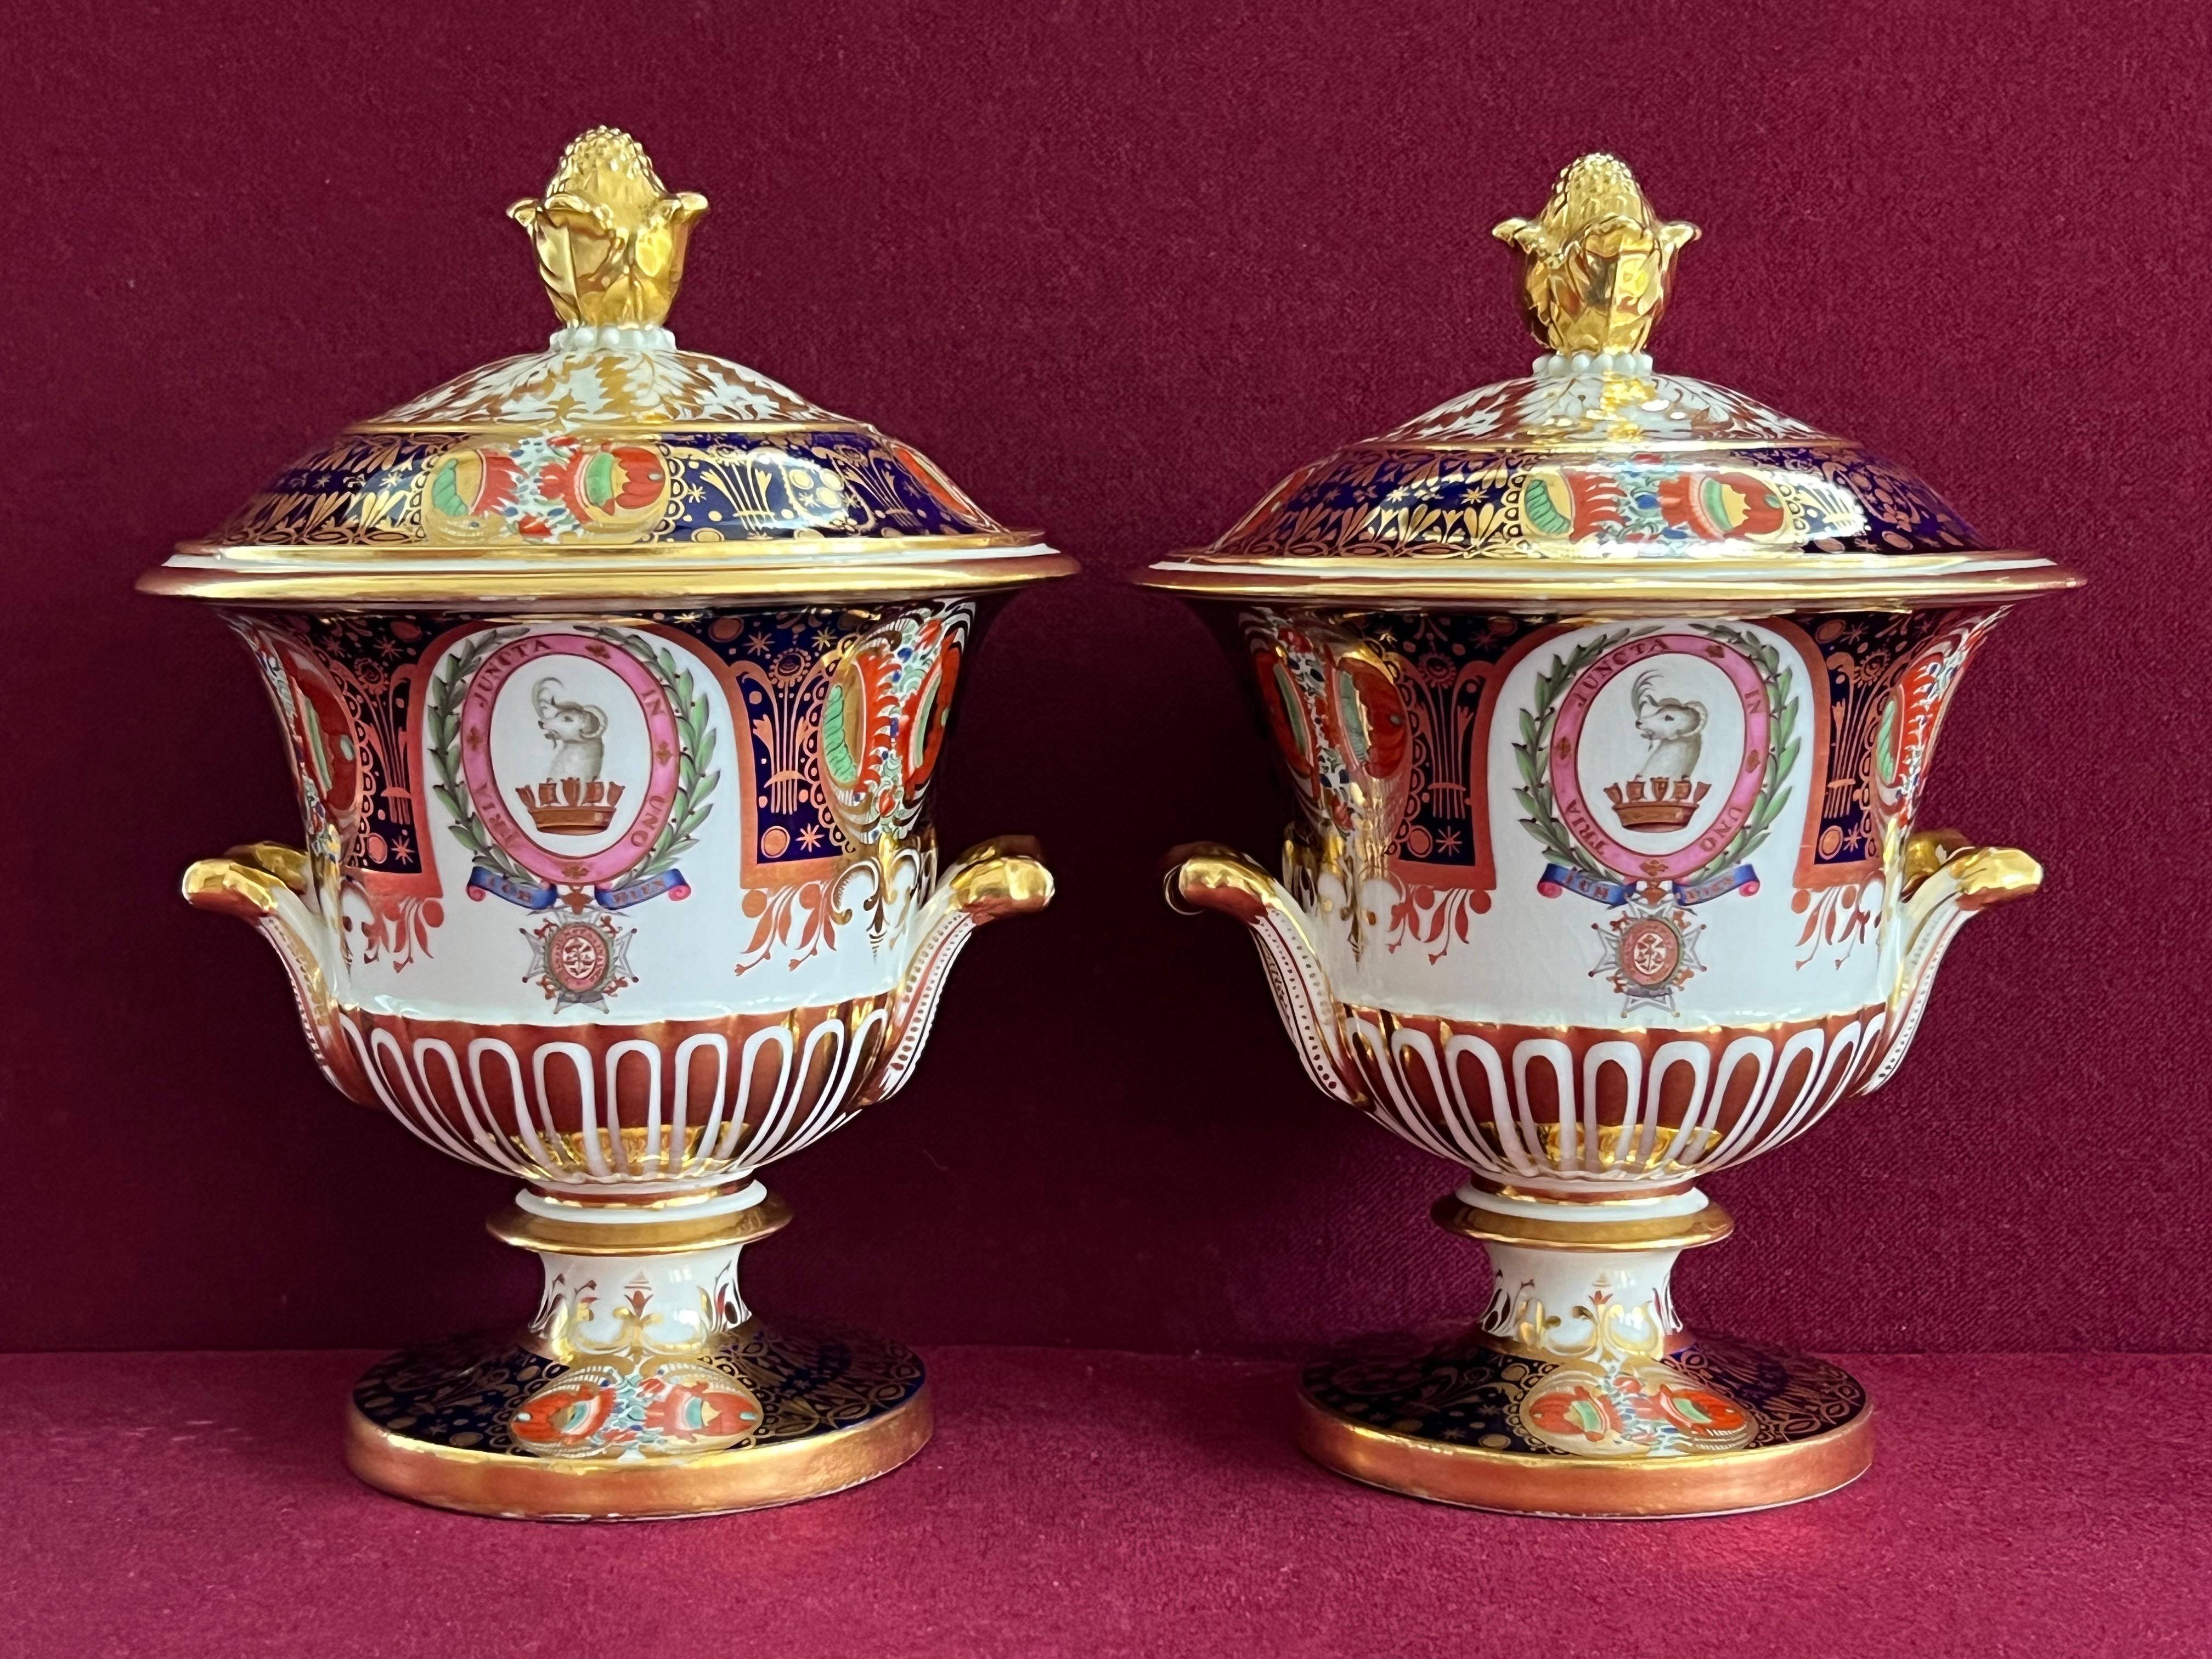 A pair of Chamberlain Worcester armorial dessert tureens and covers from the Admiral Yeo service c.1815-1820, each of twin-handled semi-reeded campana form on spreading foot, painted and enriched in gilding with the crest, motto and Badge of the